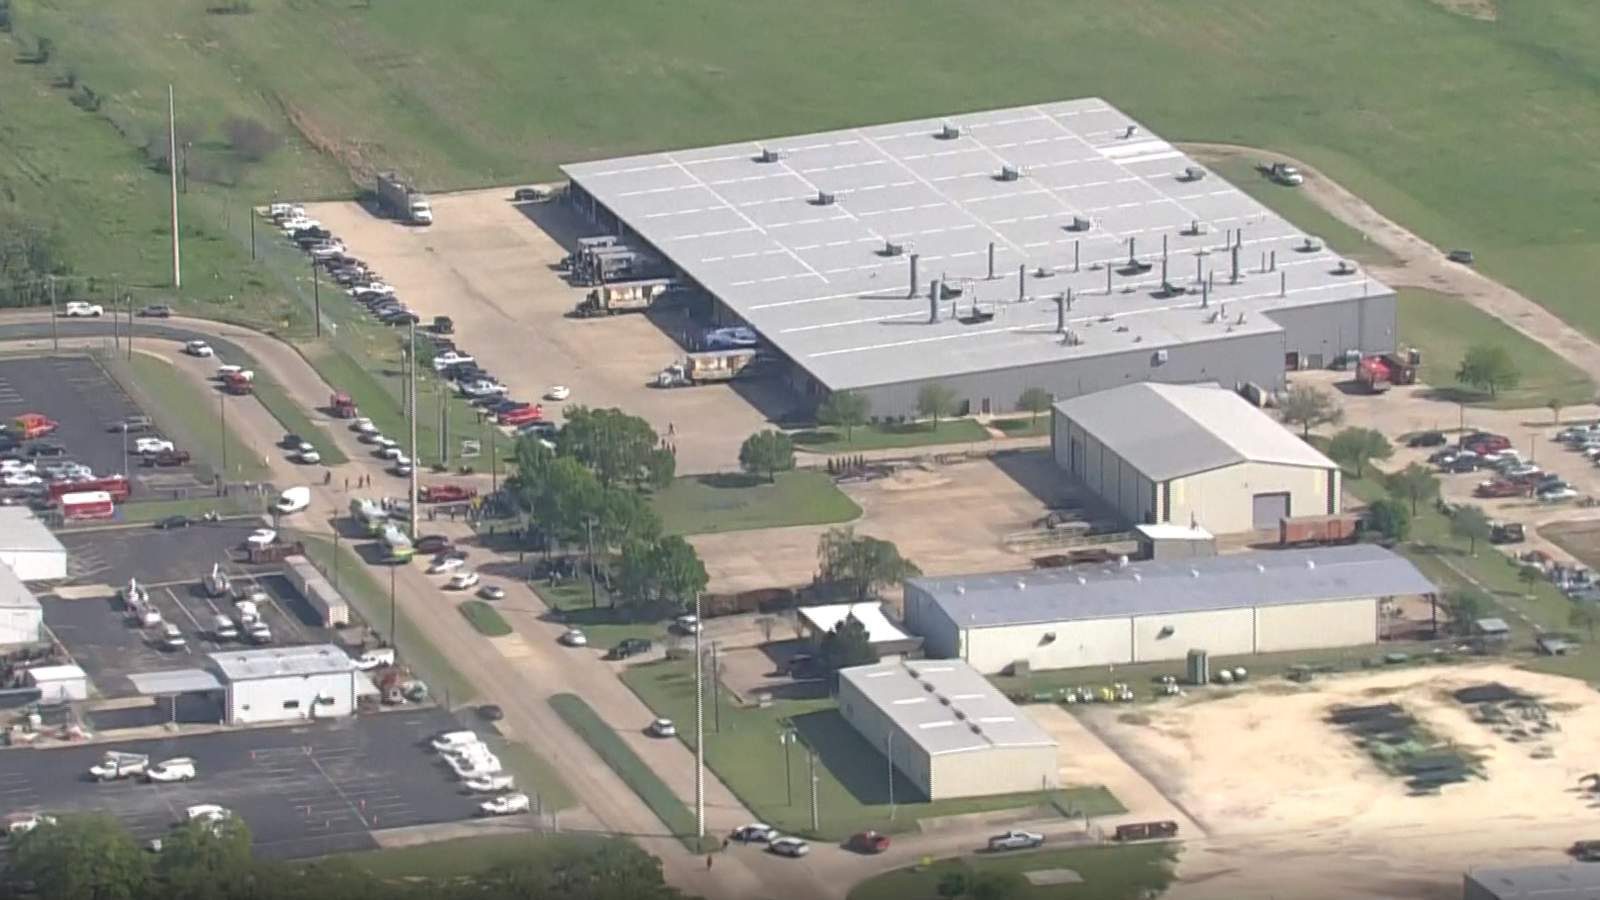 Police: Employee kills 1, wounds 5 at Bryan cabinet business